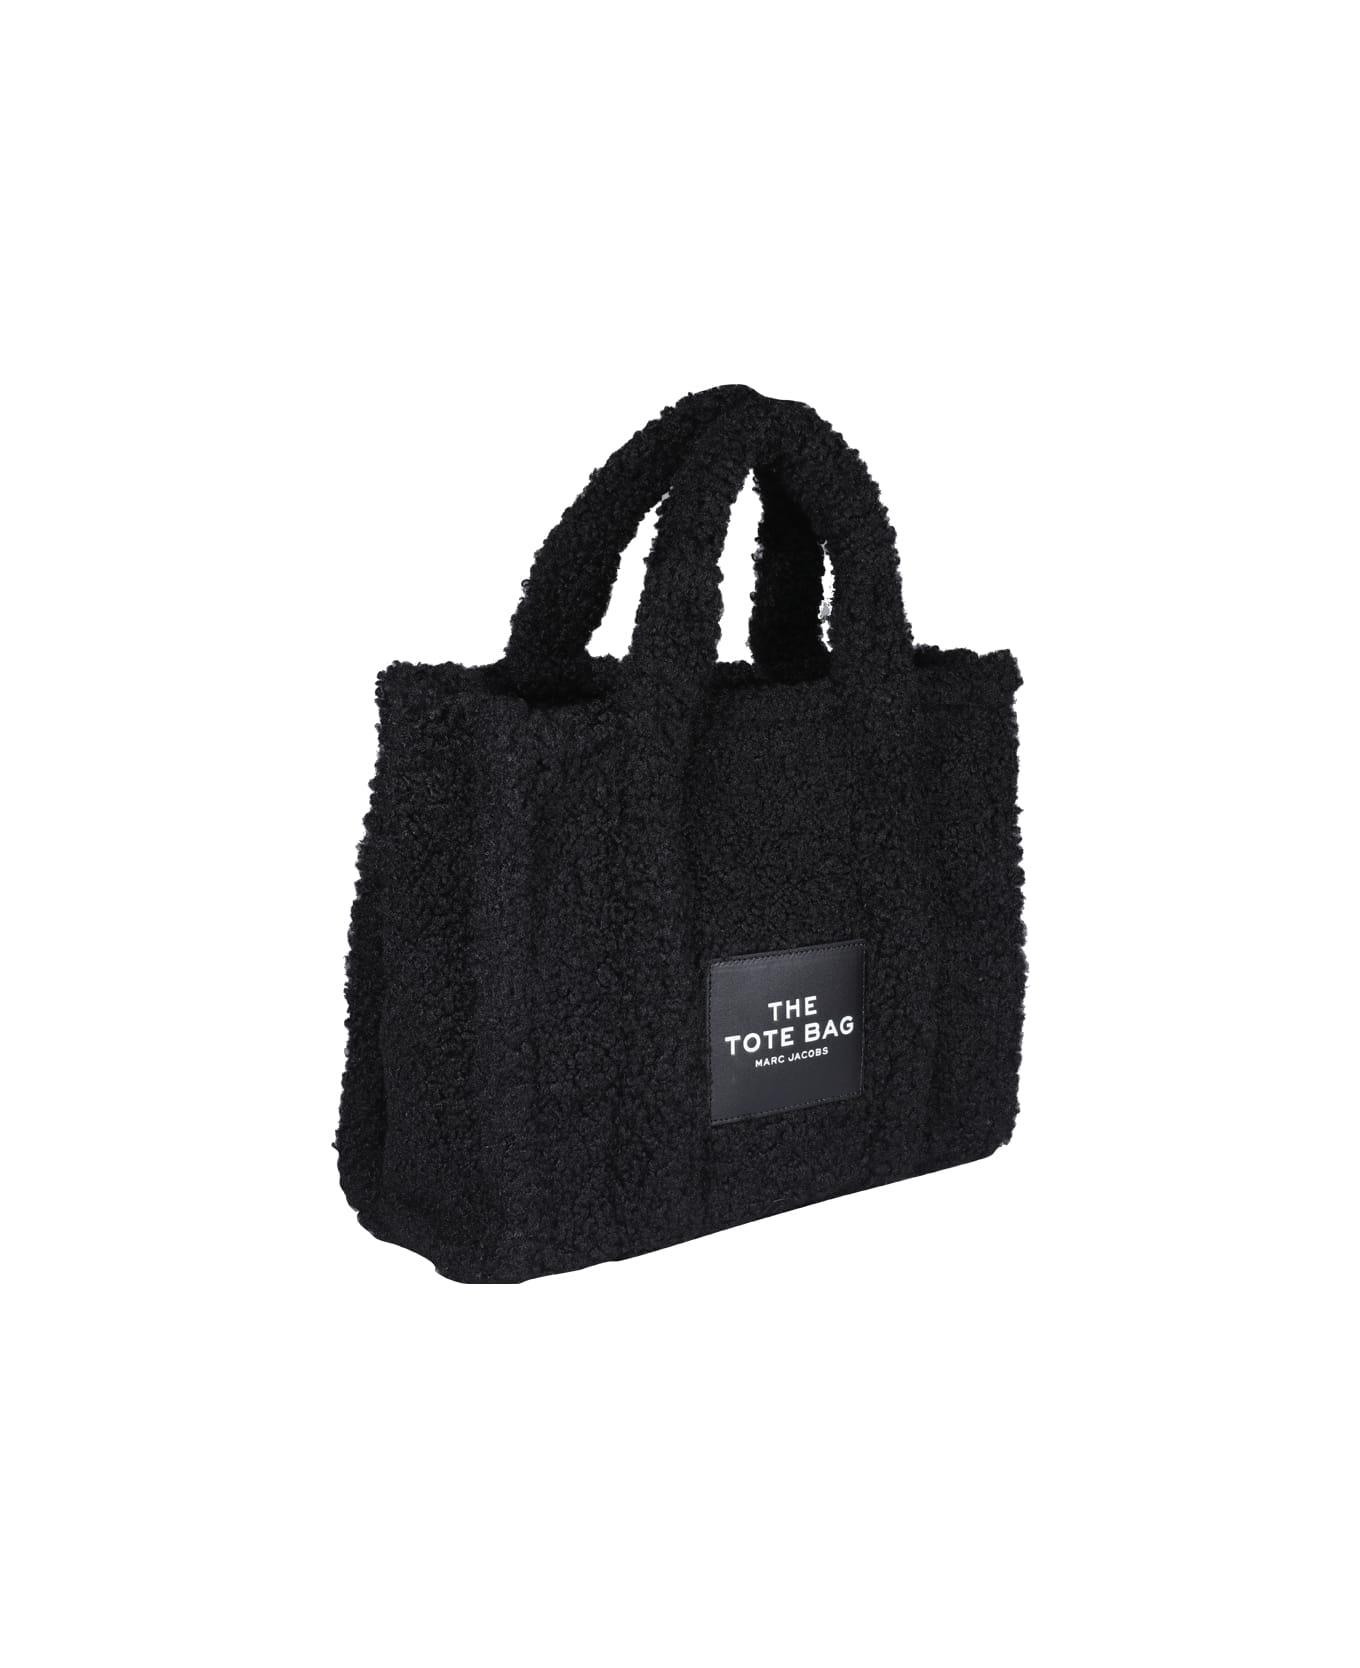 Marc Jacobs The Teddy Medium Tote Bag - Black トートバッグ